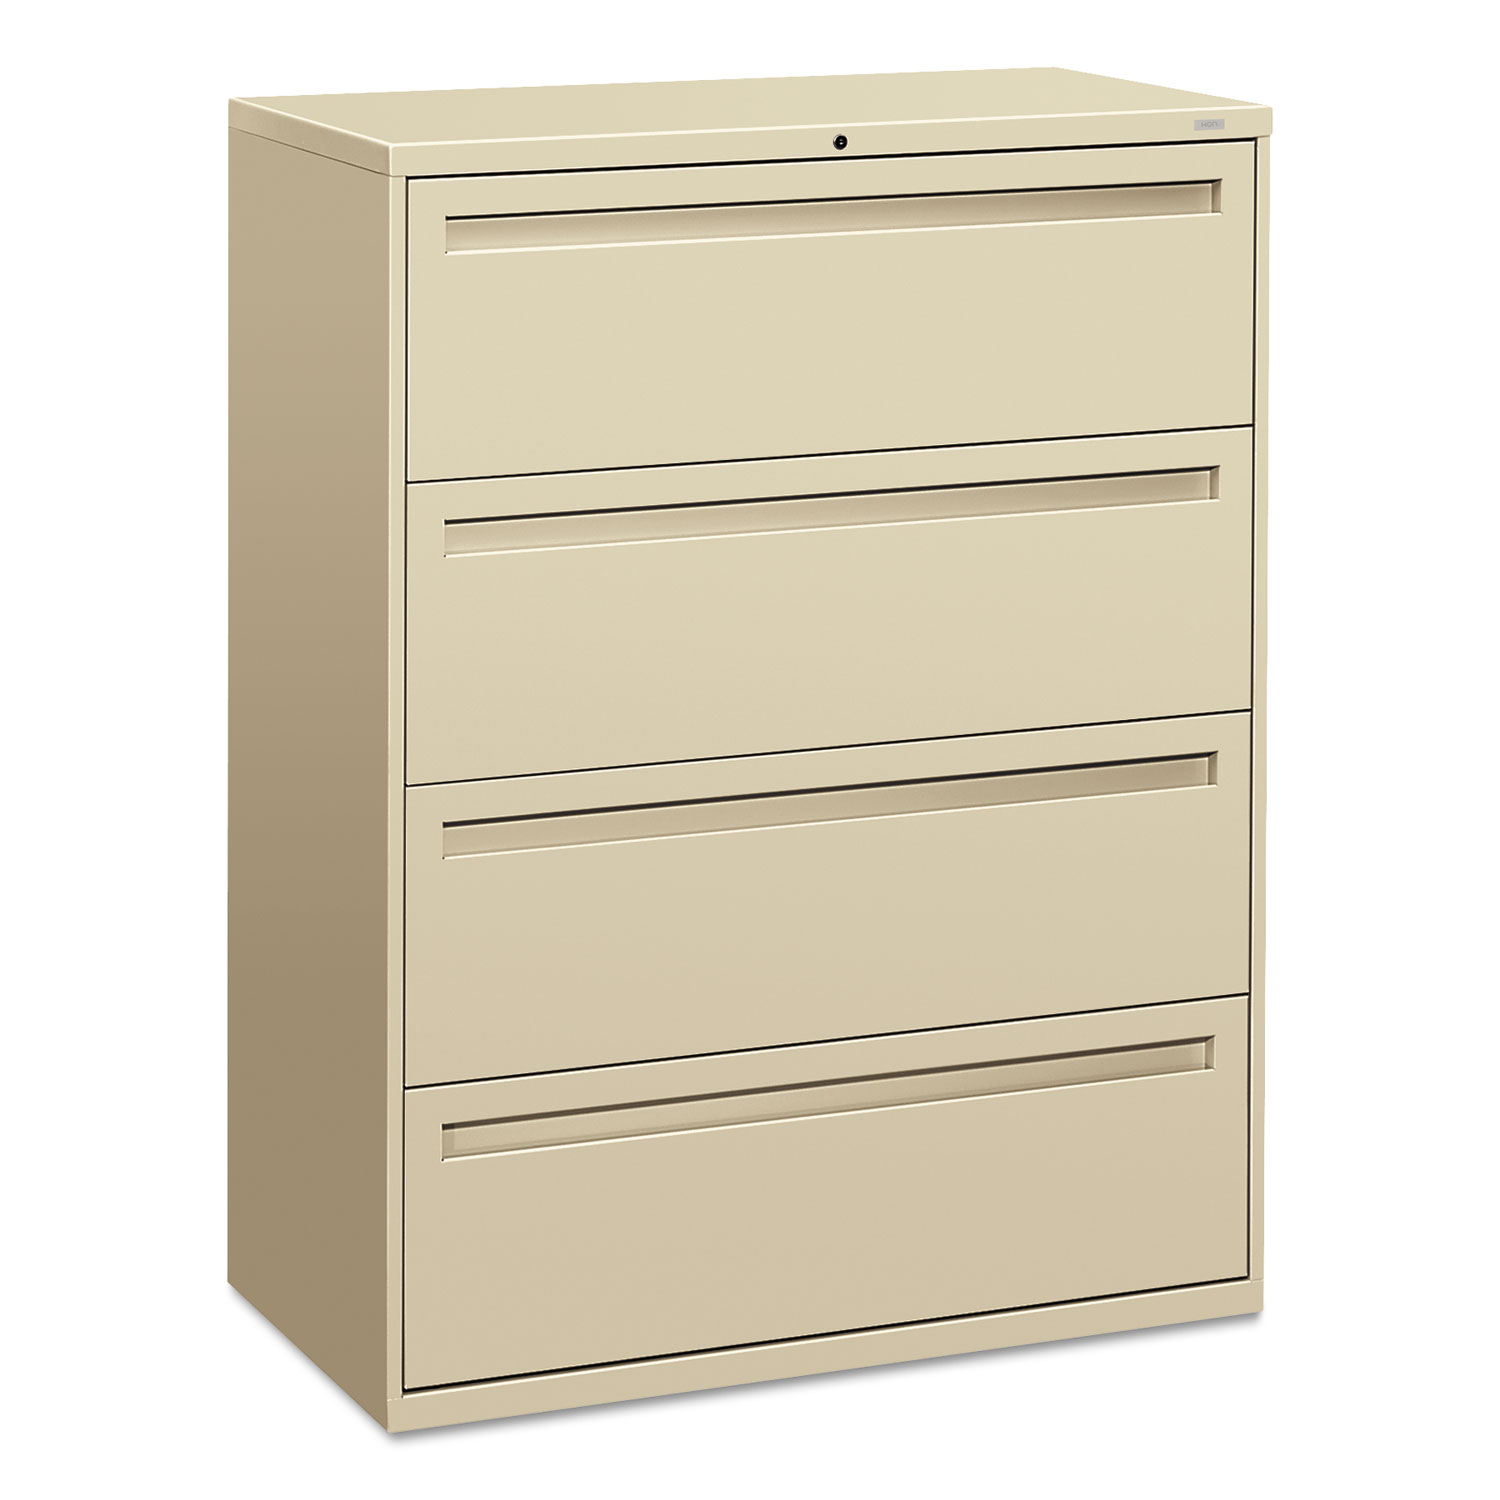 700 Series Four-Drawer Lateral File, 42w x 18d x 52 1/2h, Putty